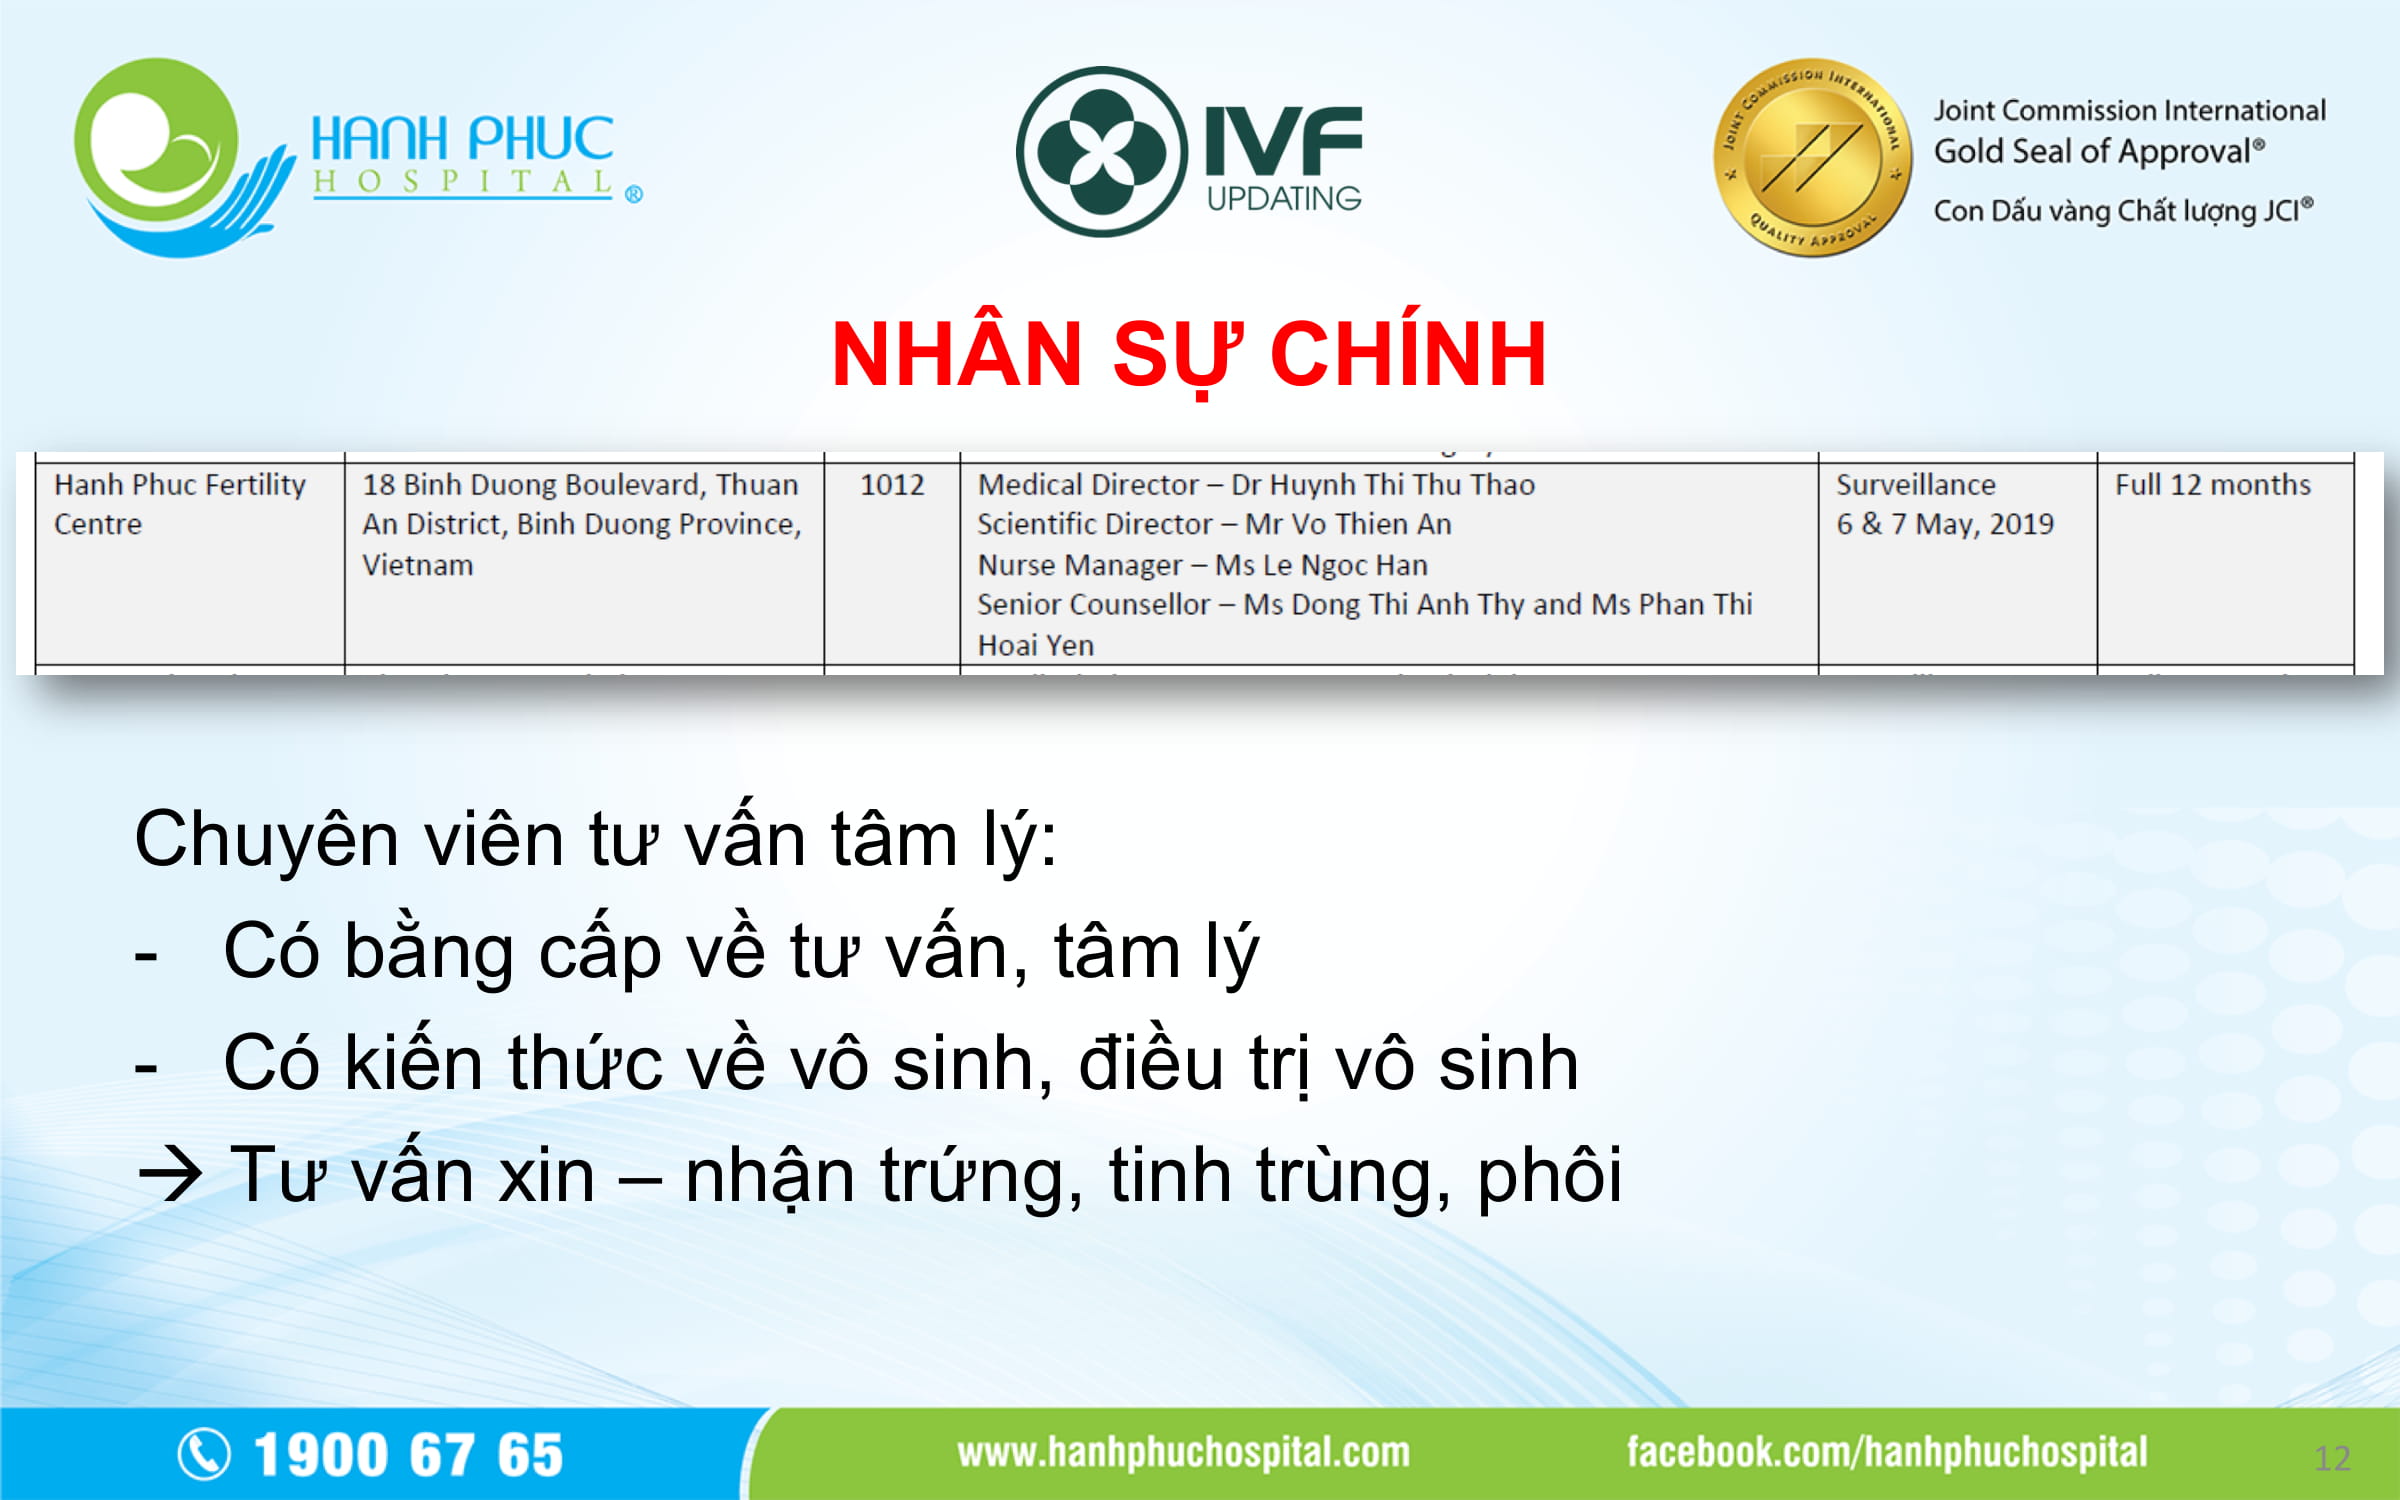 BS Vo Thien An Report_IVF UPDATING 5-12